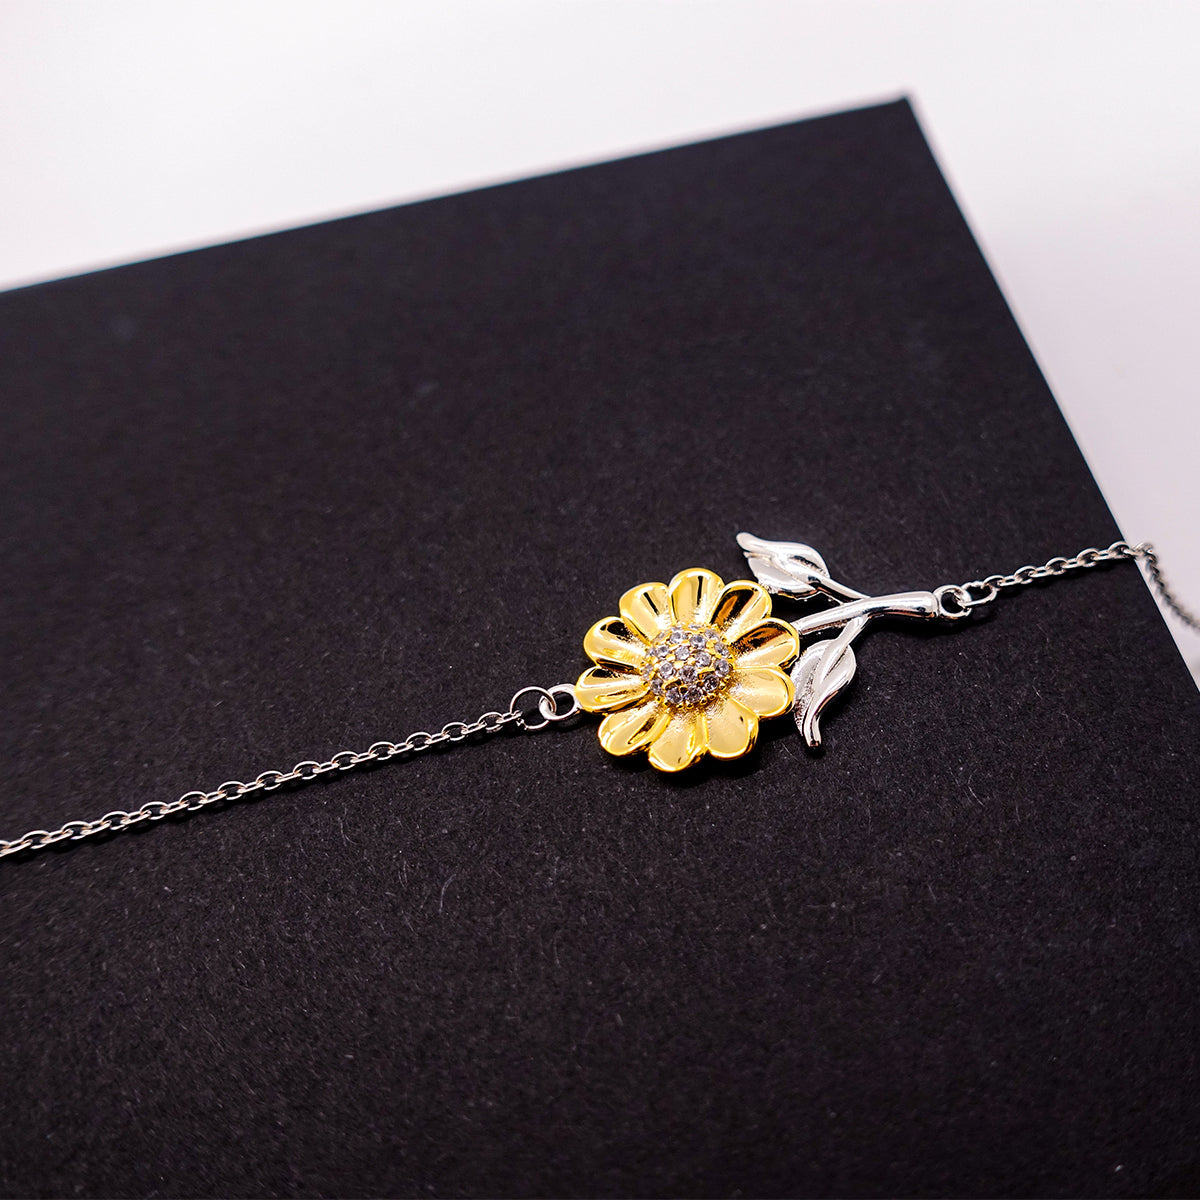 Bonus Dad Sunflower Bracelet - Youll always have a special place in my heart - Engraved Gift for Birthday, Christmas, Fathers Day - Unique and Inspirational Jewelry for Stepdad, Adoptive Father, Veterans